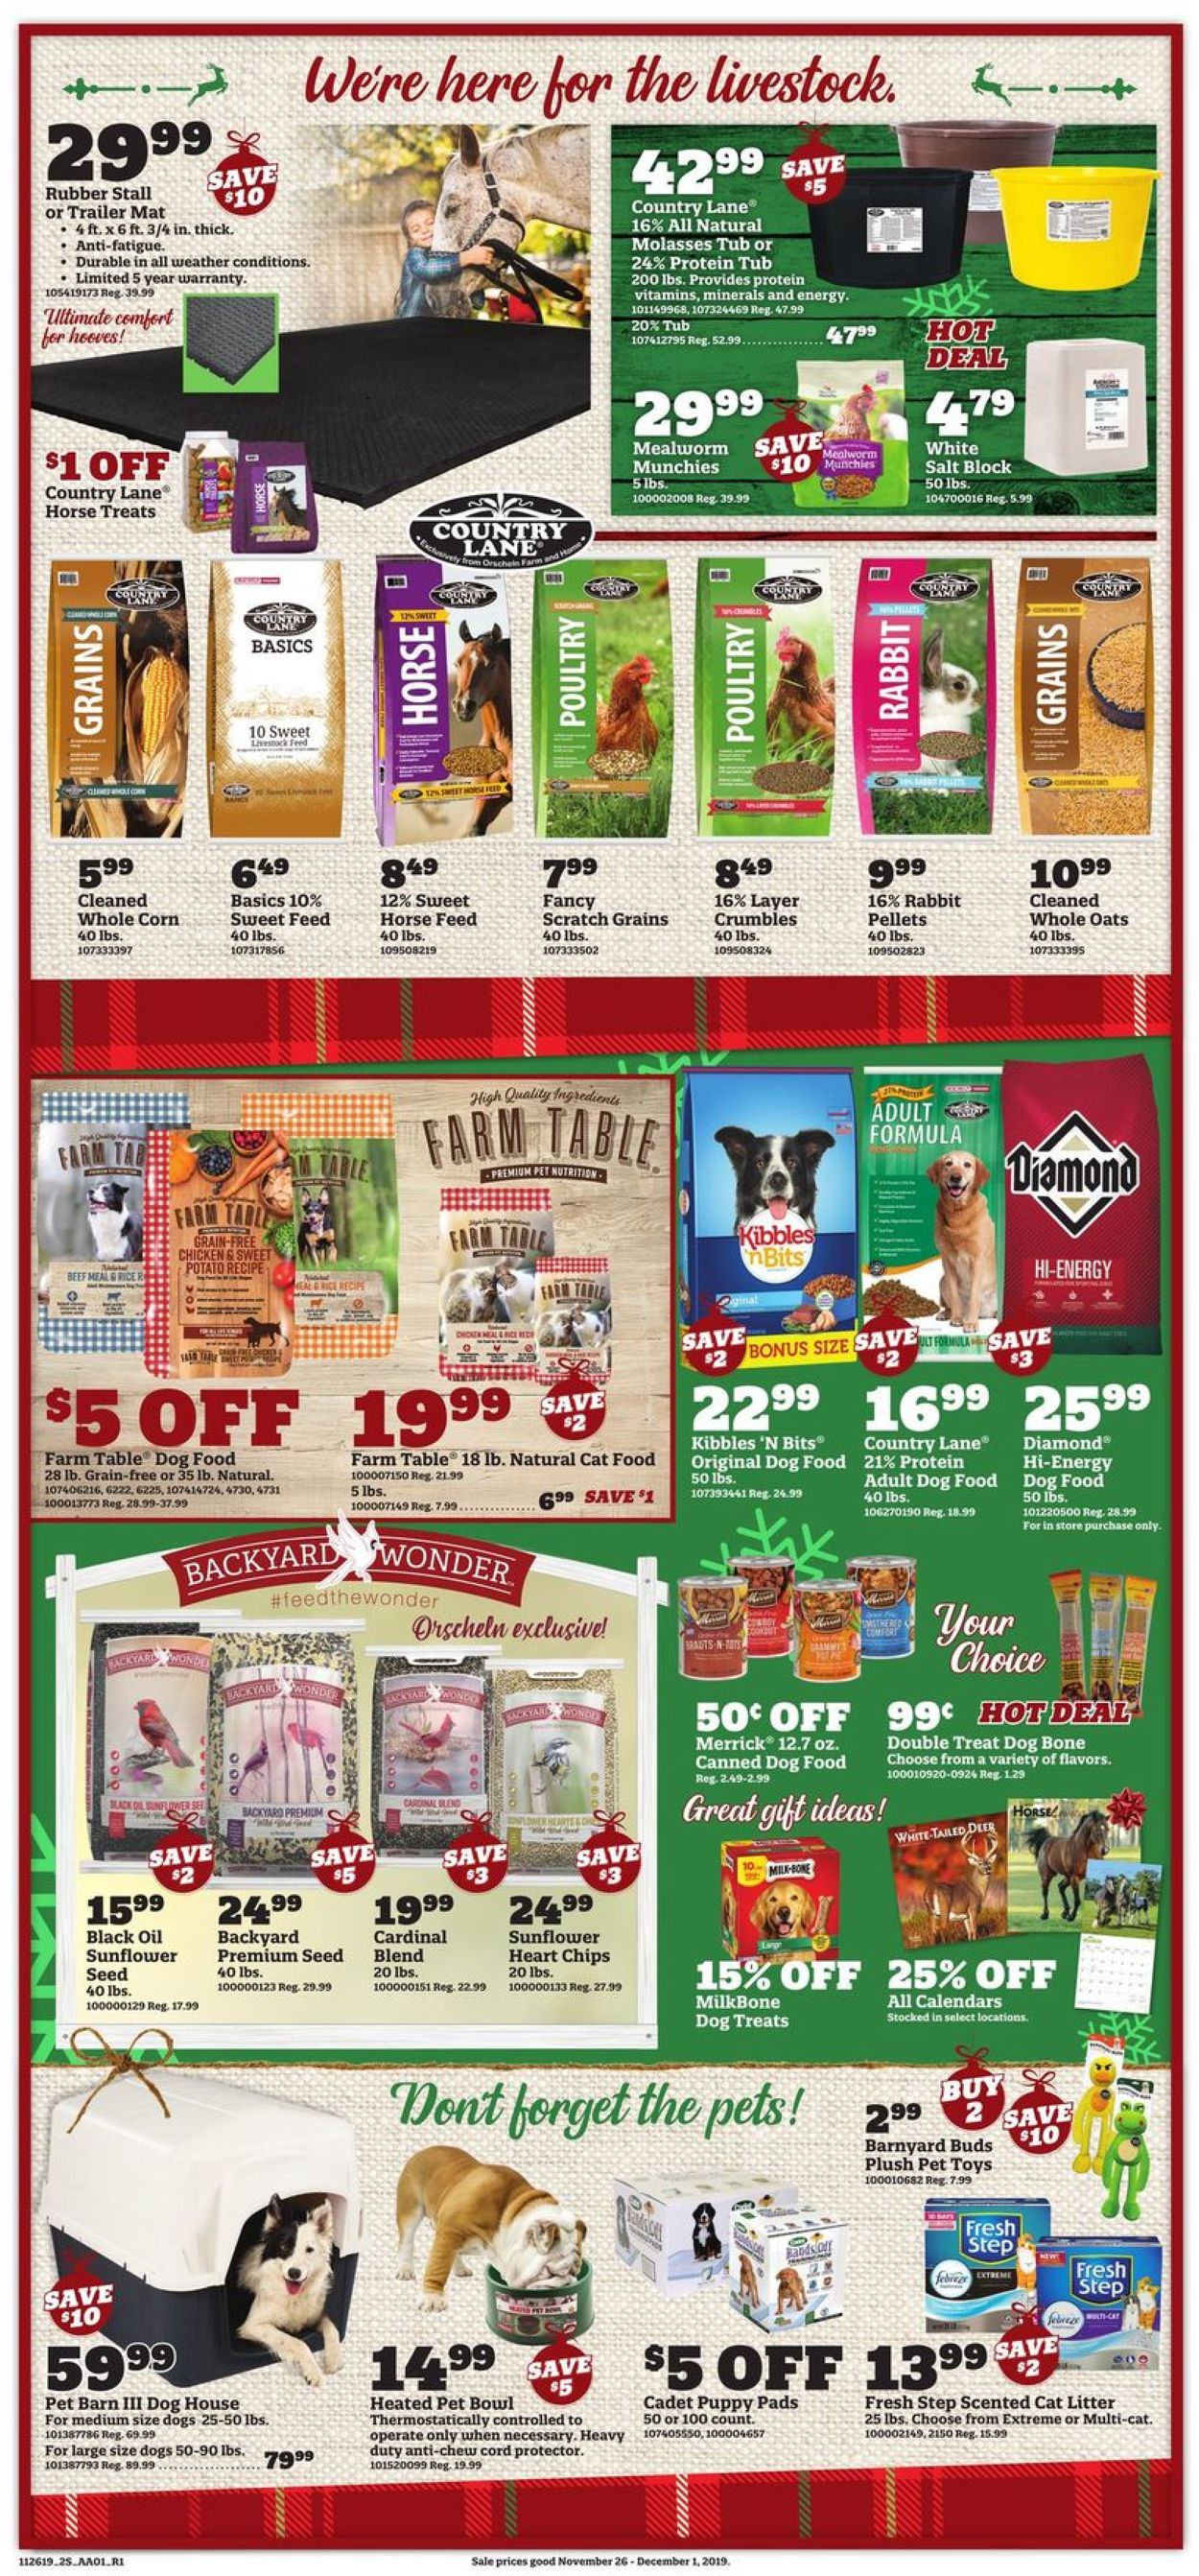 Orscheln Farm and Home - Black Friday Ad 2019 Weekly Ad Circular - valid 11/26-12/01/2019 (Page 2)